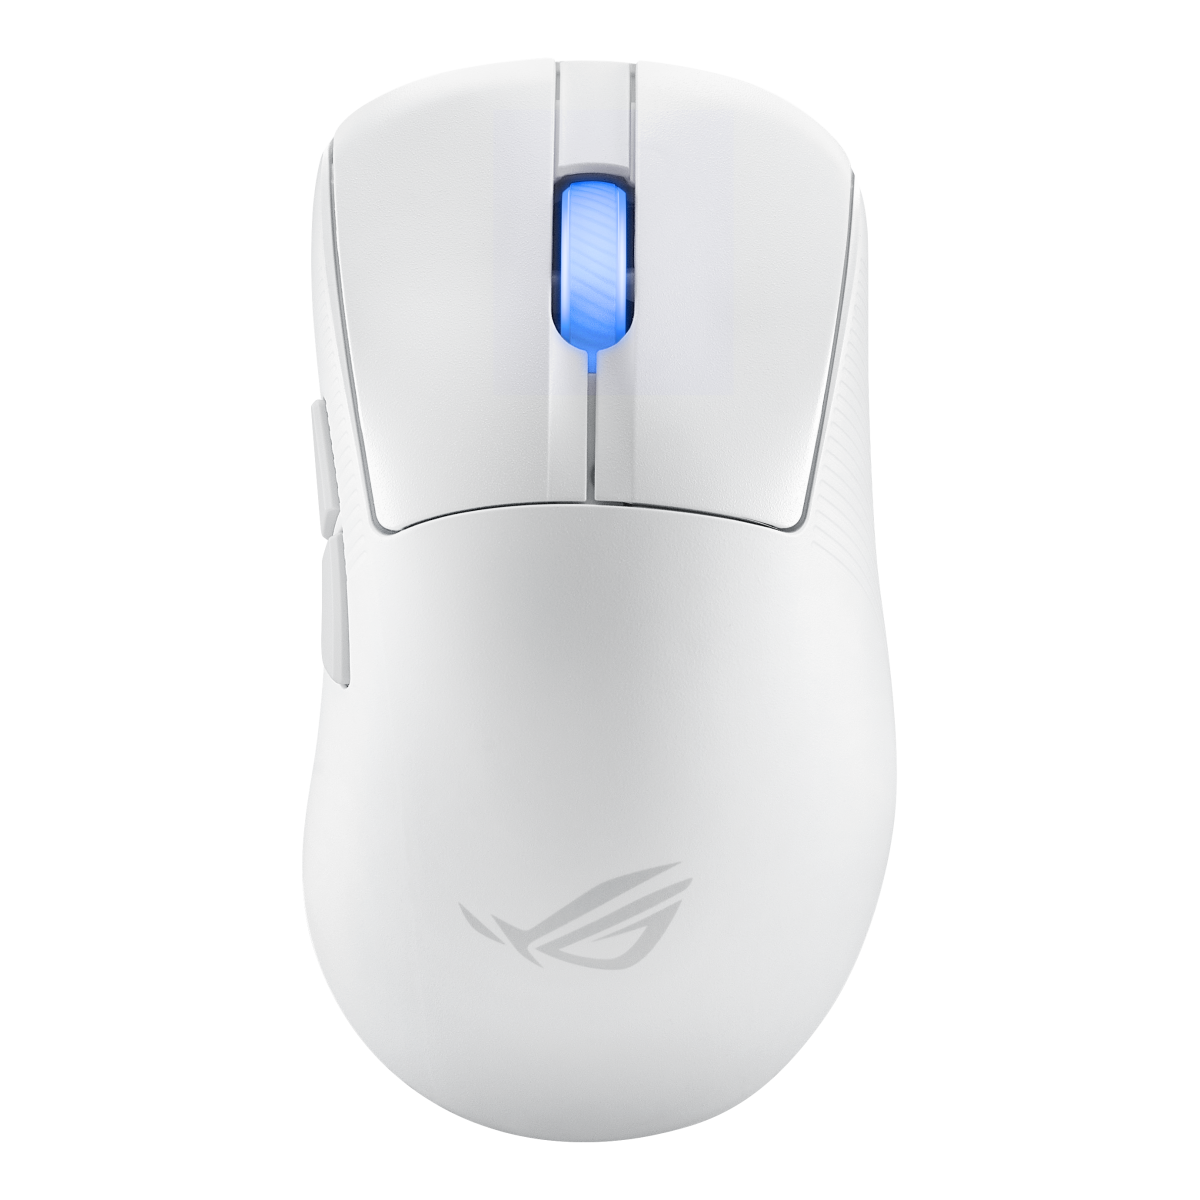 ASUS ROG Keris II Ace Wireless AimPoint White Gaming Maus 2